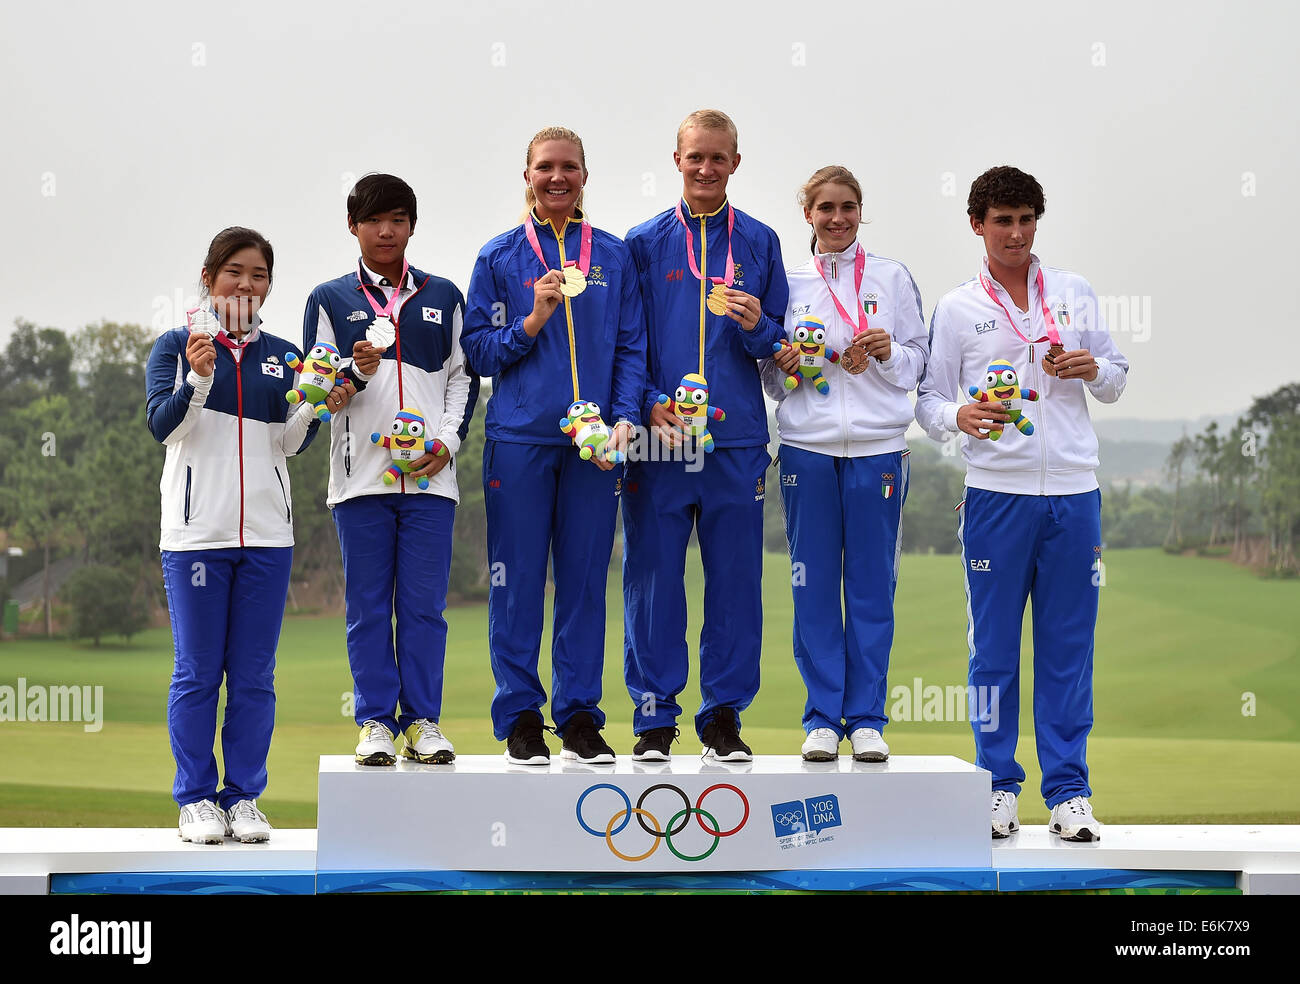 (140826) -- NANJING, Aug. 26, 2014 (Xinhua) -- Gold medalists Linnea Strom (3rd, L) and Marcus Kinhult (3rd, R) of Sweden, silver medalists Lee Soyoung (1st, L) and Youm Eun Ho (2nd, L) of South Korea and bronze medalists Virginia Elena Carta (2nd, R) and Renato Paratore of Italy stand on the podium during the awarding ceremony of the Mixed Team event of golf competition at Nanjing 2014 Youth Olympic Games in Nanjing, east China's Jiangsu Province, Aug. 26, 2014. (Xinhua/Guo Cheng) (ljr) Stock Photo